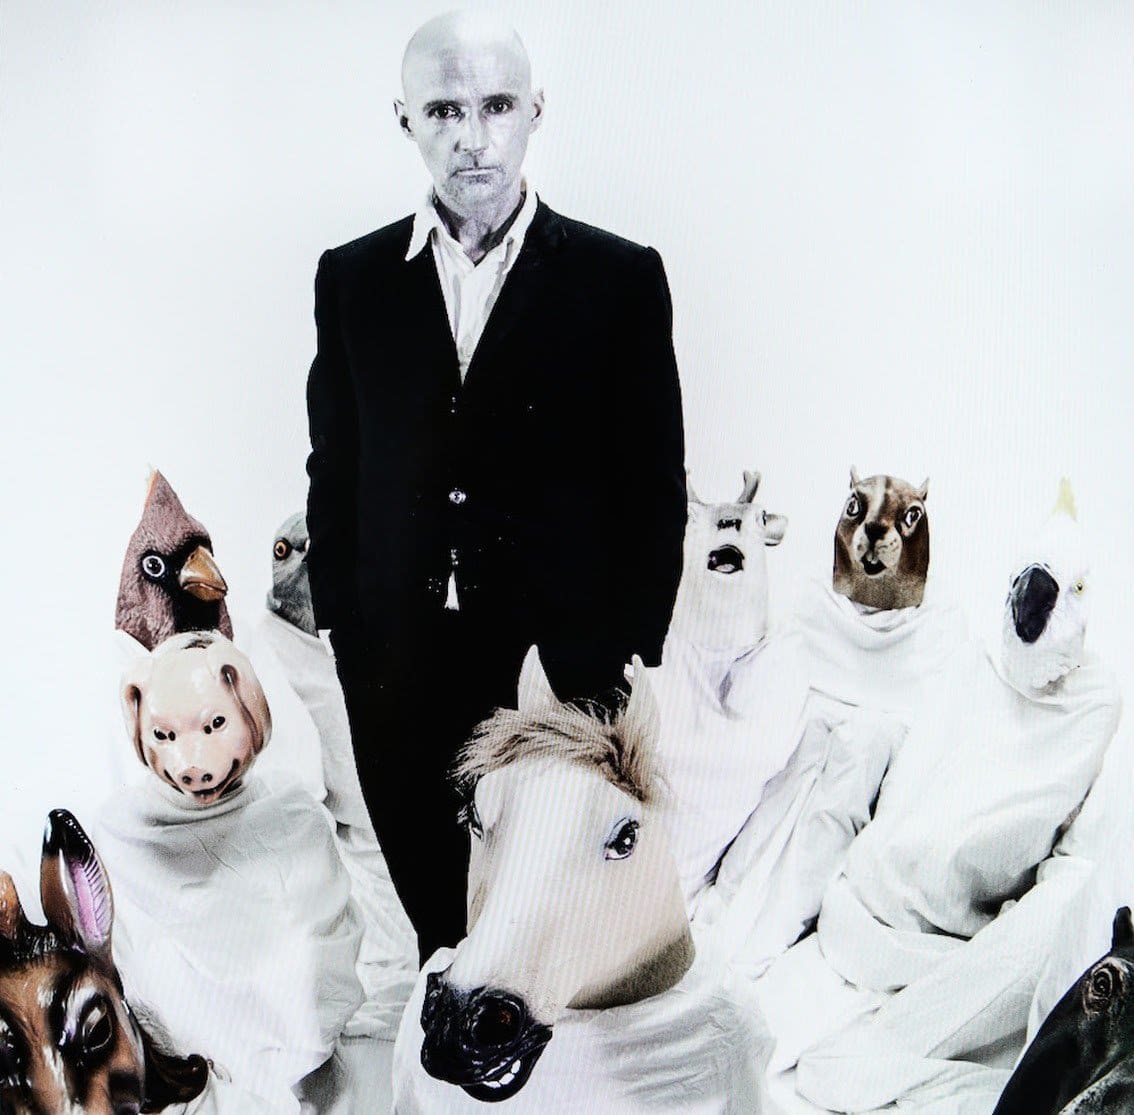 Acid Washed delivers excellent electro remix for Moby's 'Almost Loved' - listen here